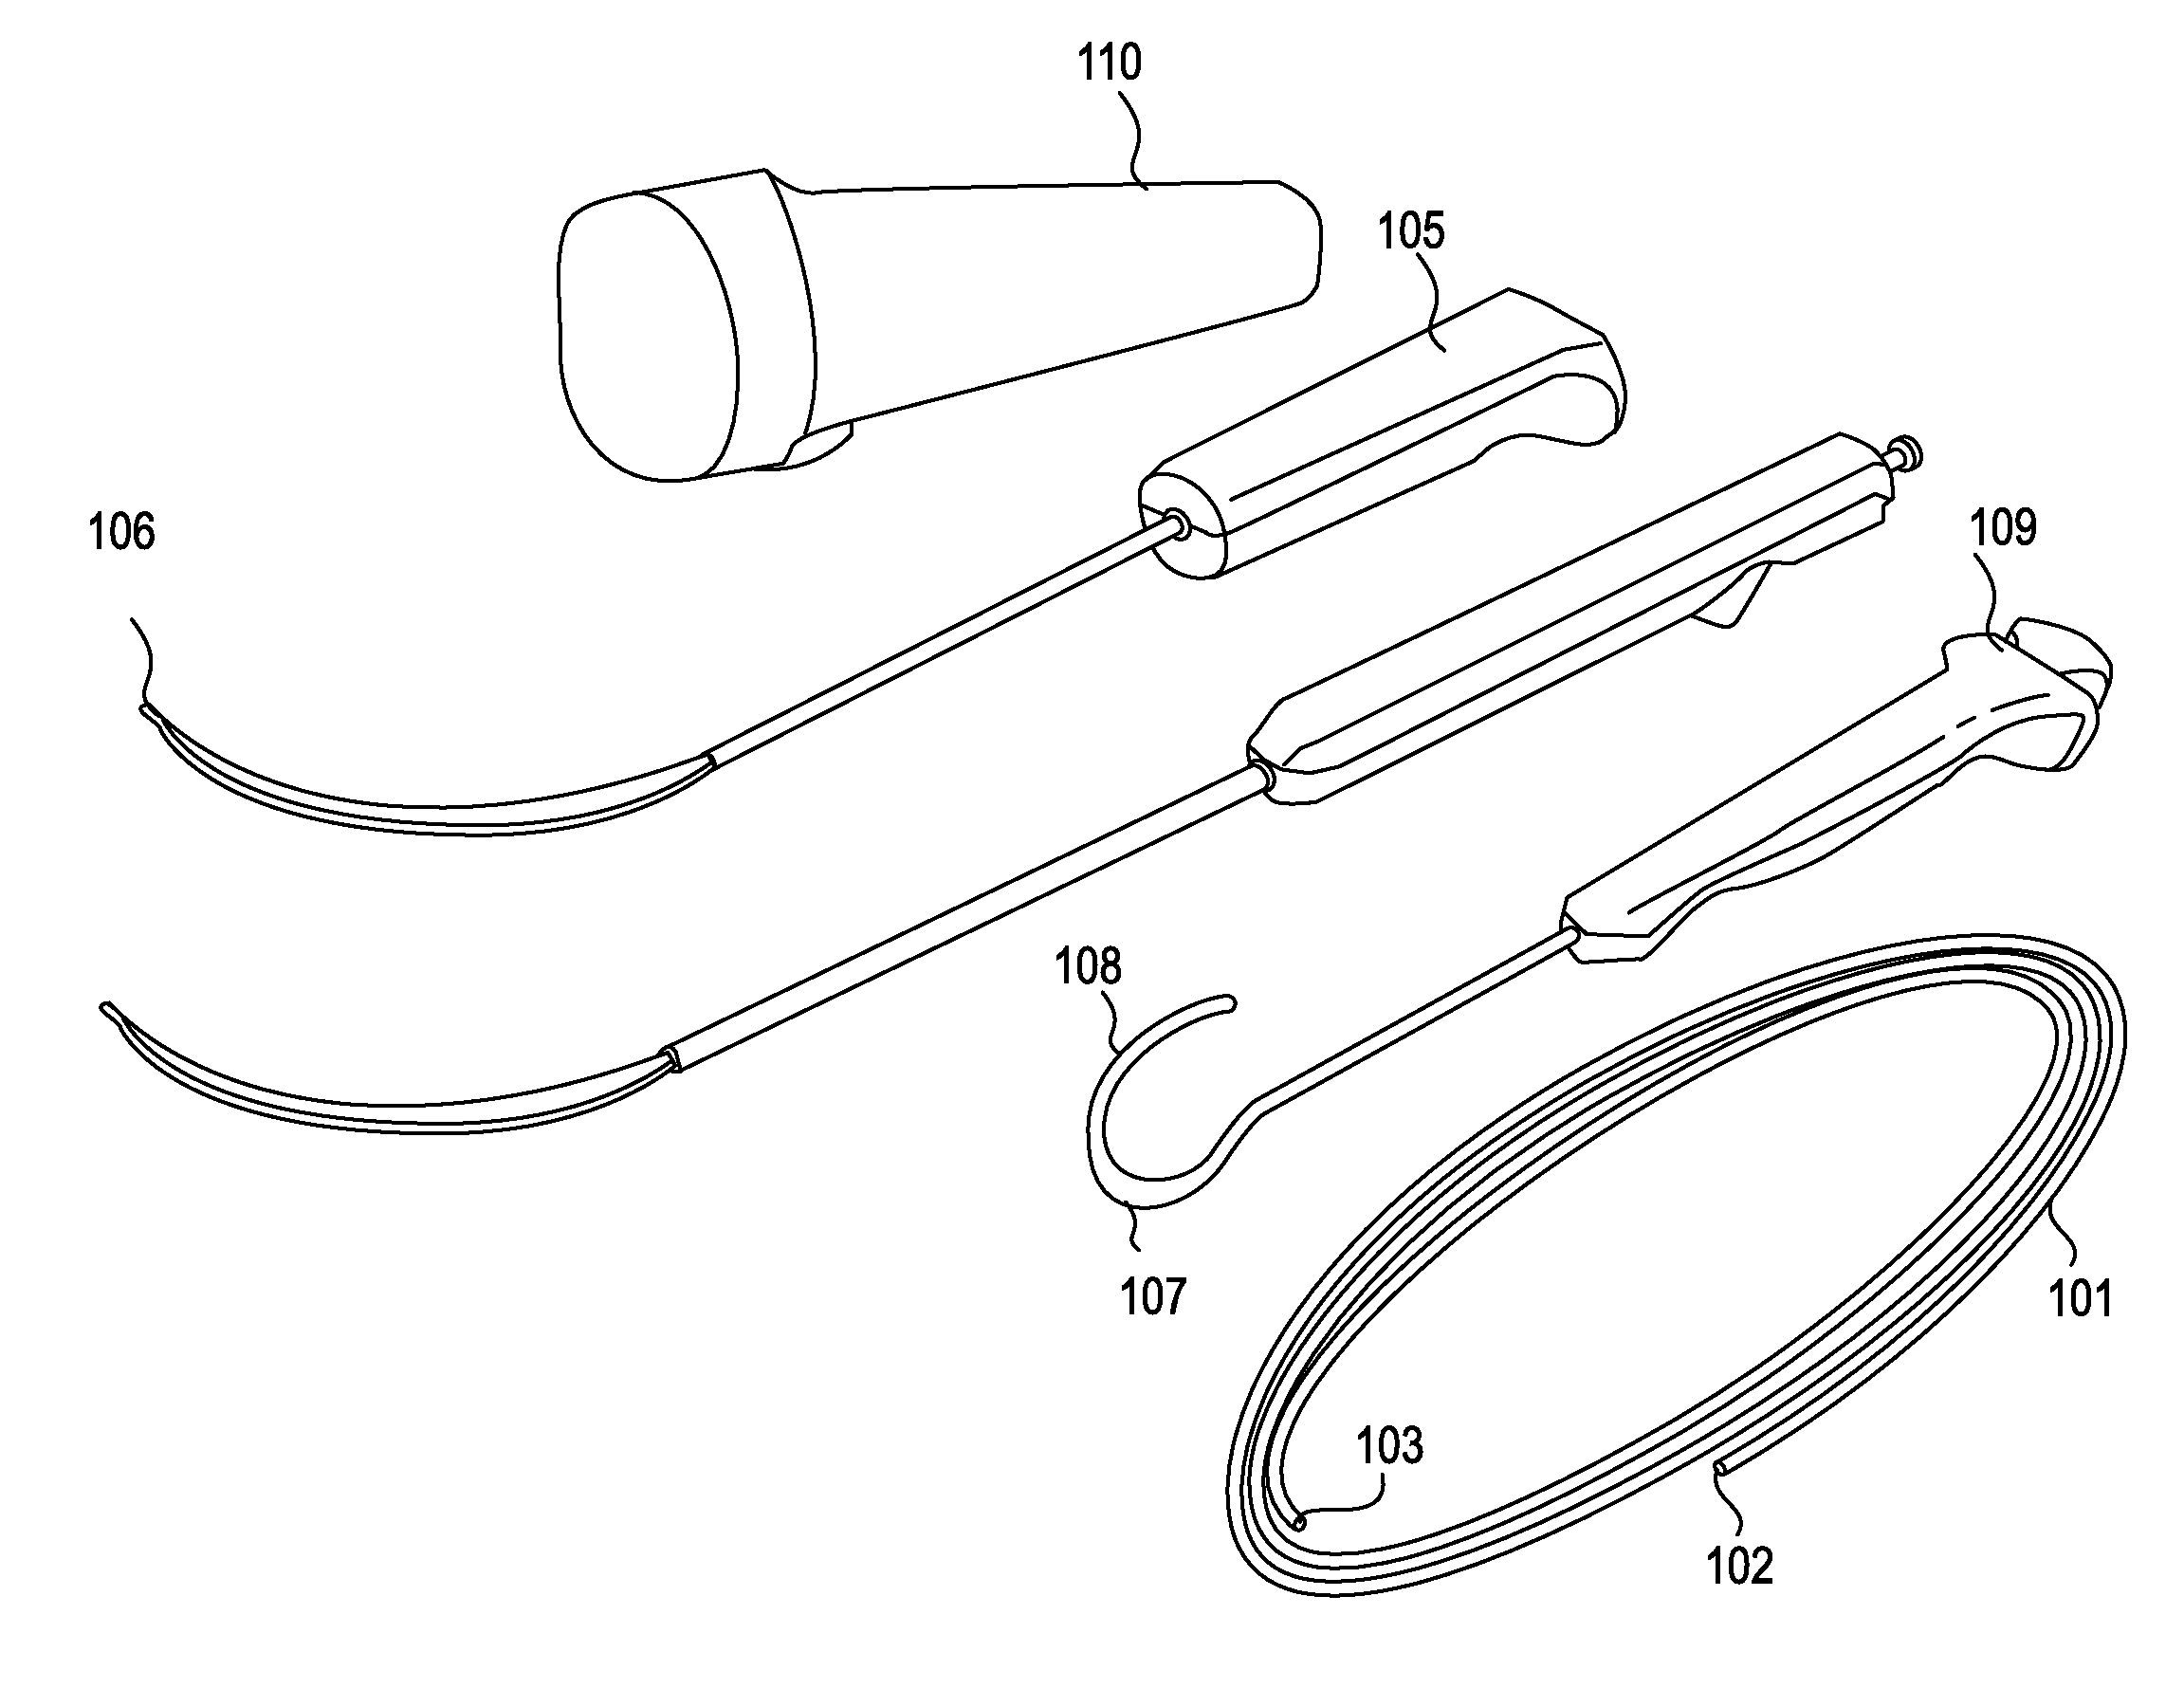 Devices and methods for treating tissue